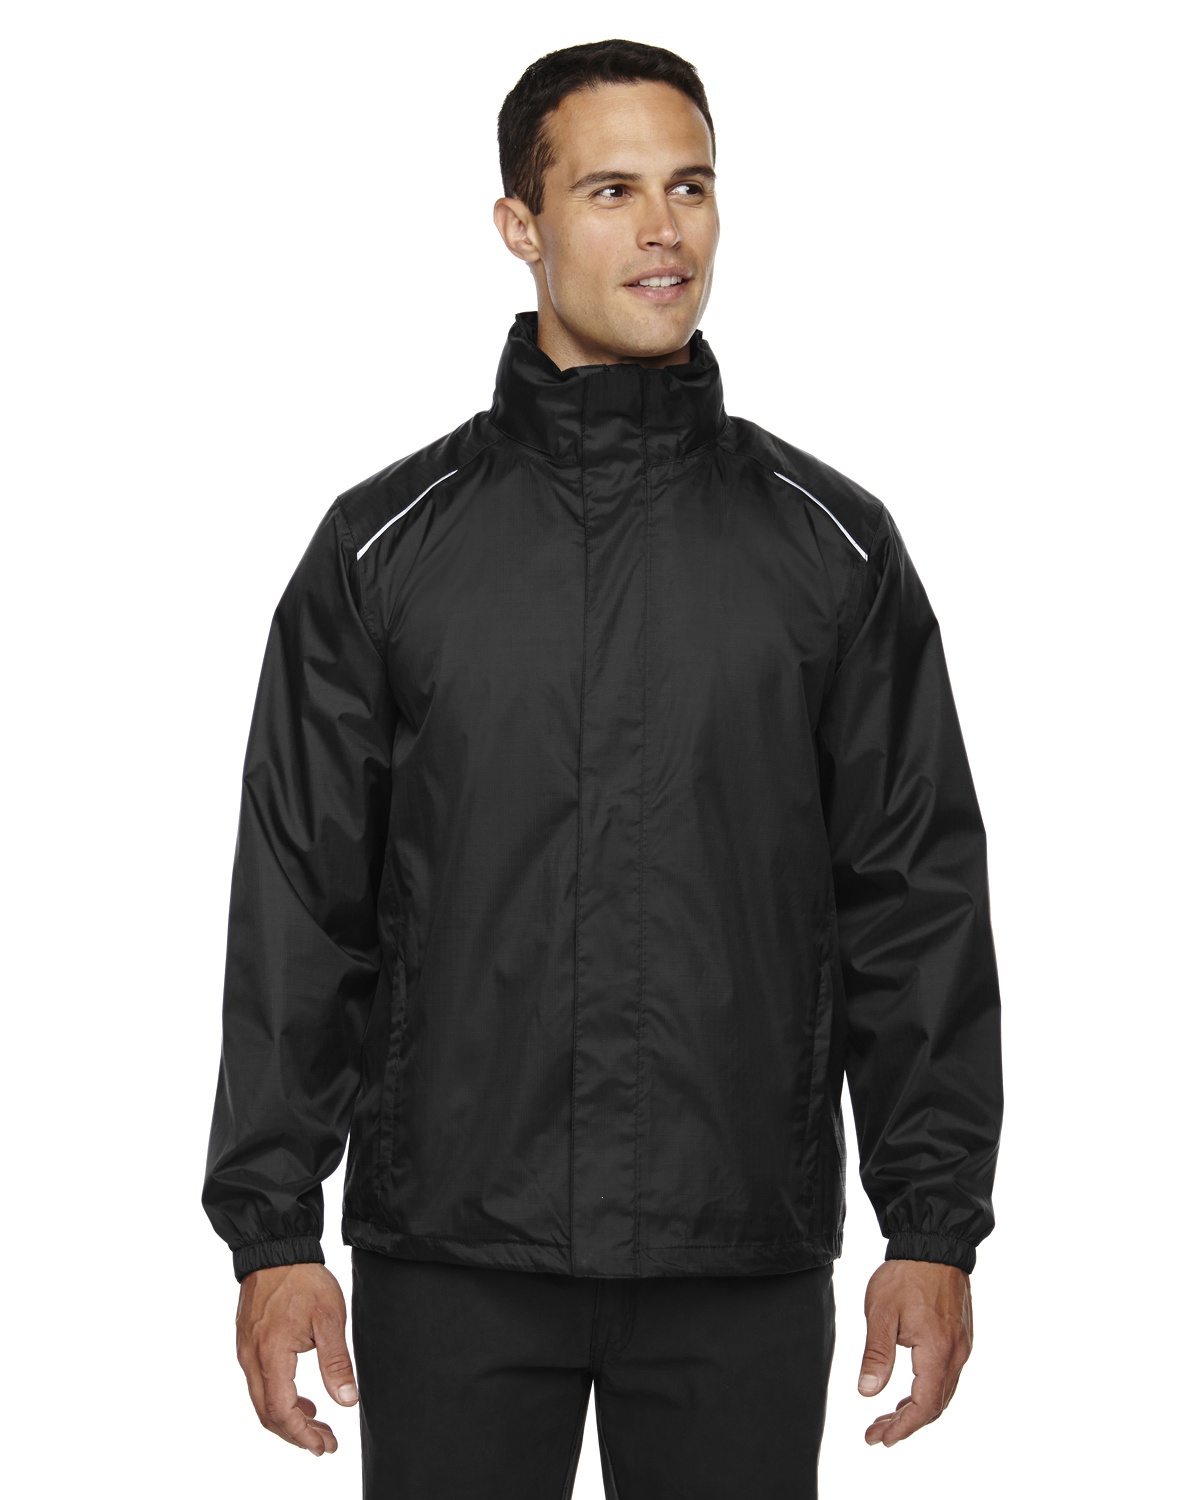 'Ash City - Core 365 88185 Men's Climate Seam-Sealed Lightweight Variegated Ripstop Jacket'